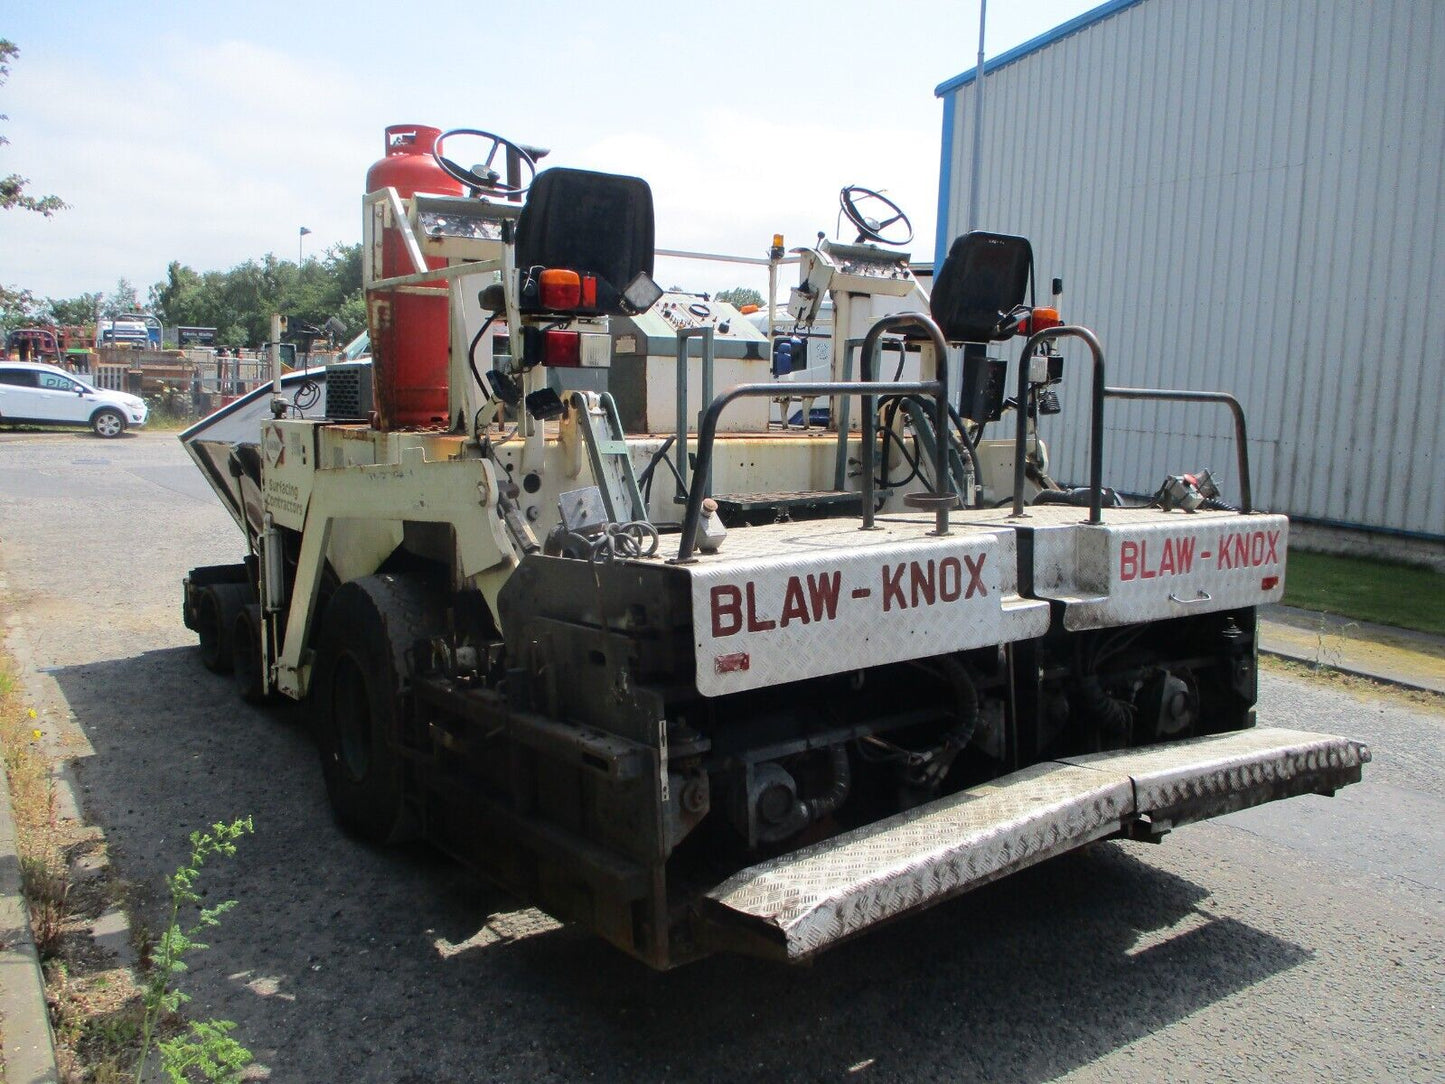 Bid on WIDE RANGE PAVING: 2.5-4.75M WIDTH CAPACITY- Buy &amp; Sell on Auction with EAMA Group